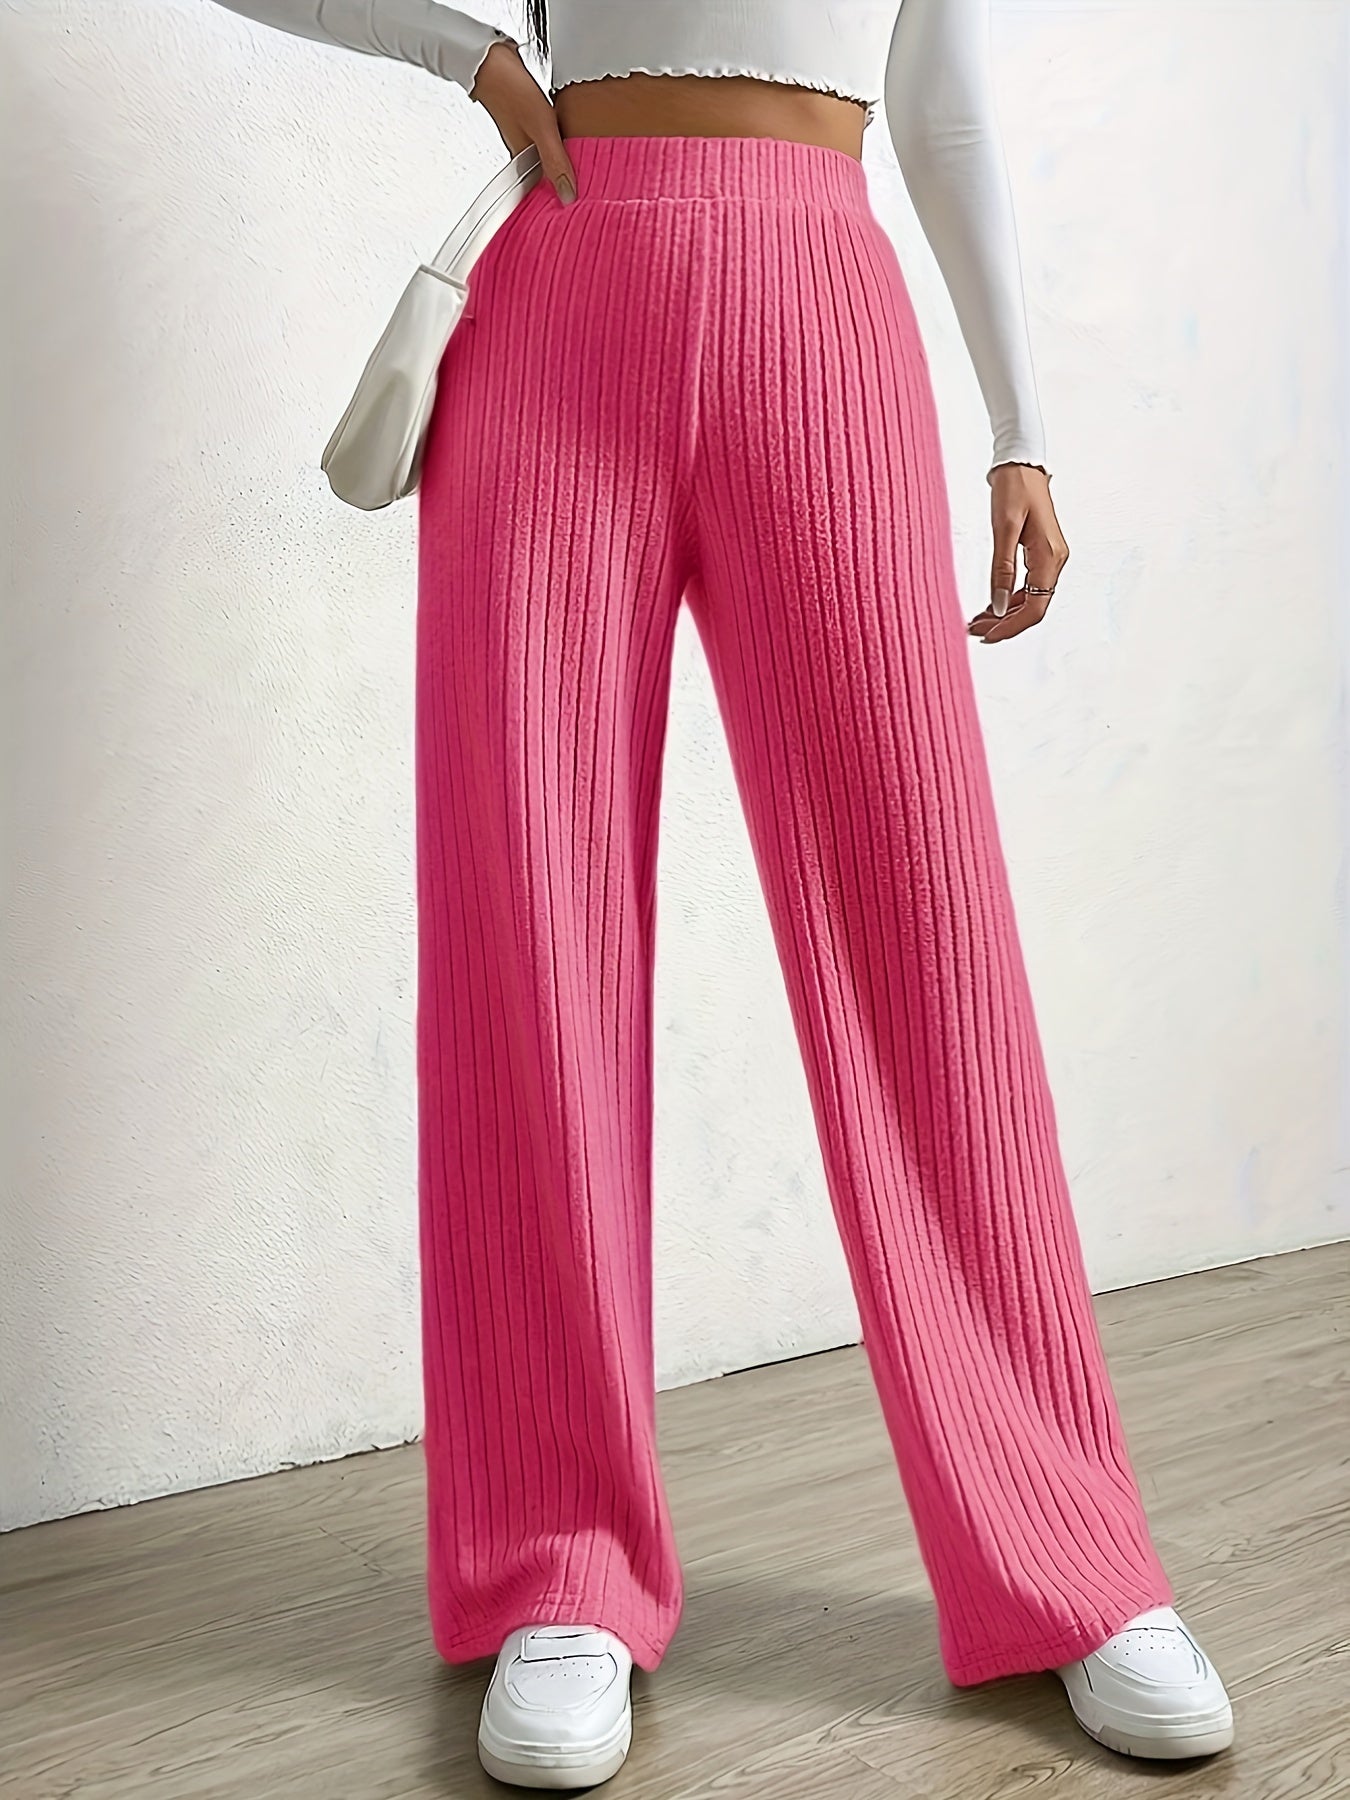 Plus Size Casual Pants, Women's Plus Solid Ribbed High Rise Medium Stretch Wide Leg Trousers